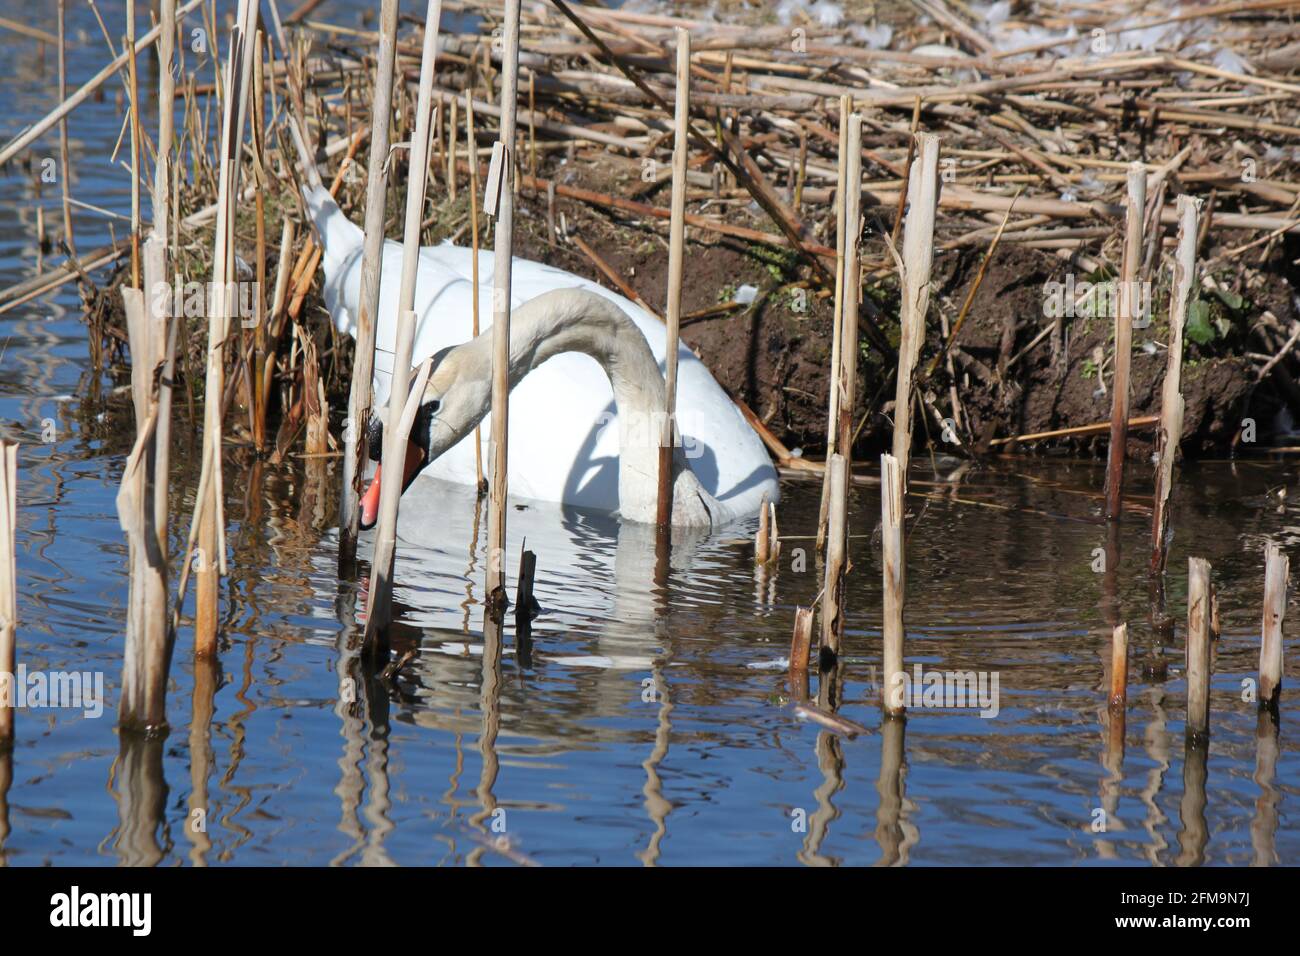 Solitary swan using lake reeds to build nest. Swans and their habitat in urban Scotland. Urban wildlife in UK and majestic wild water birds. Stock Photo